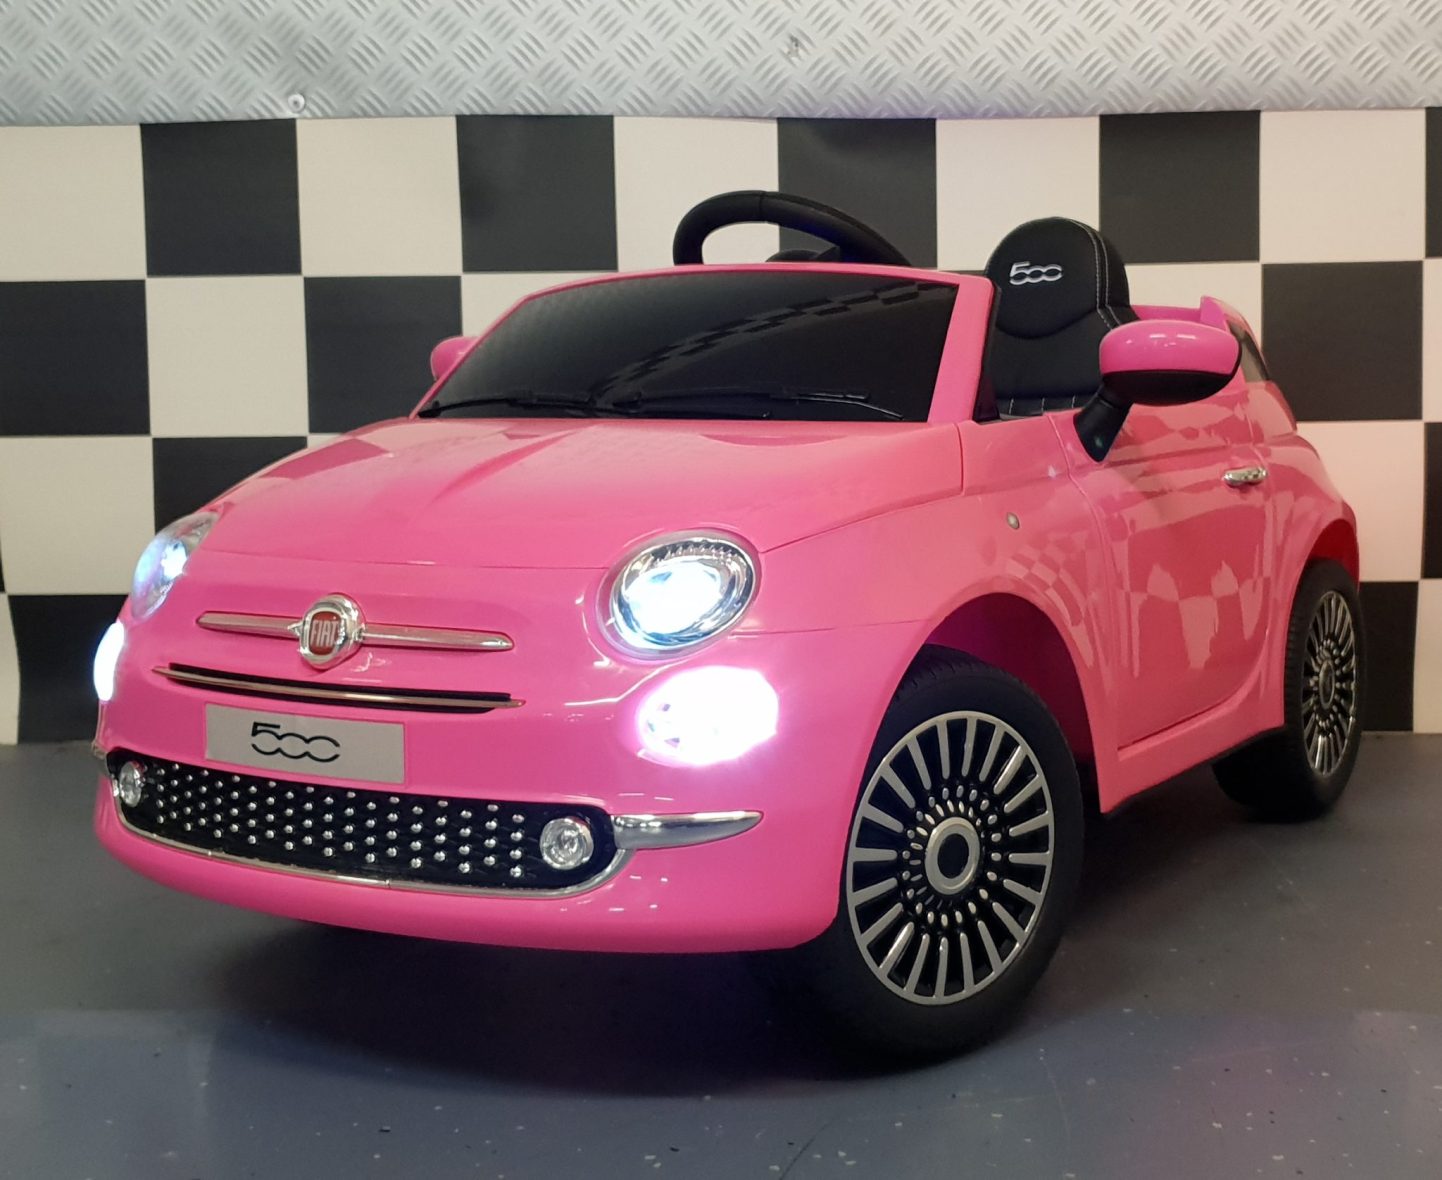 Fiat 500 Battery Children’s Toy Car 12 Volts with Remote Control Pink